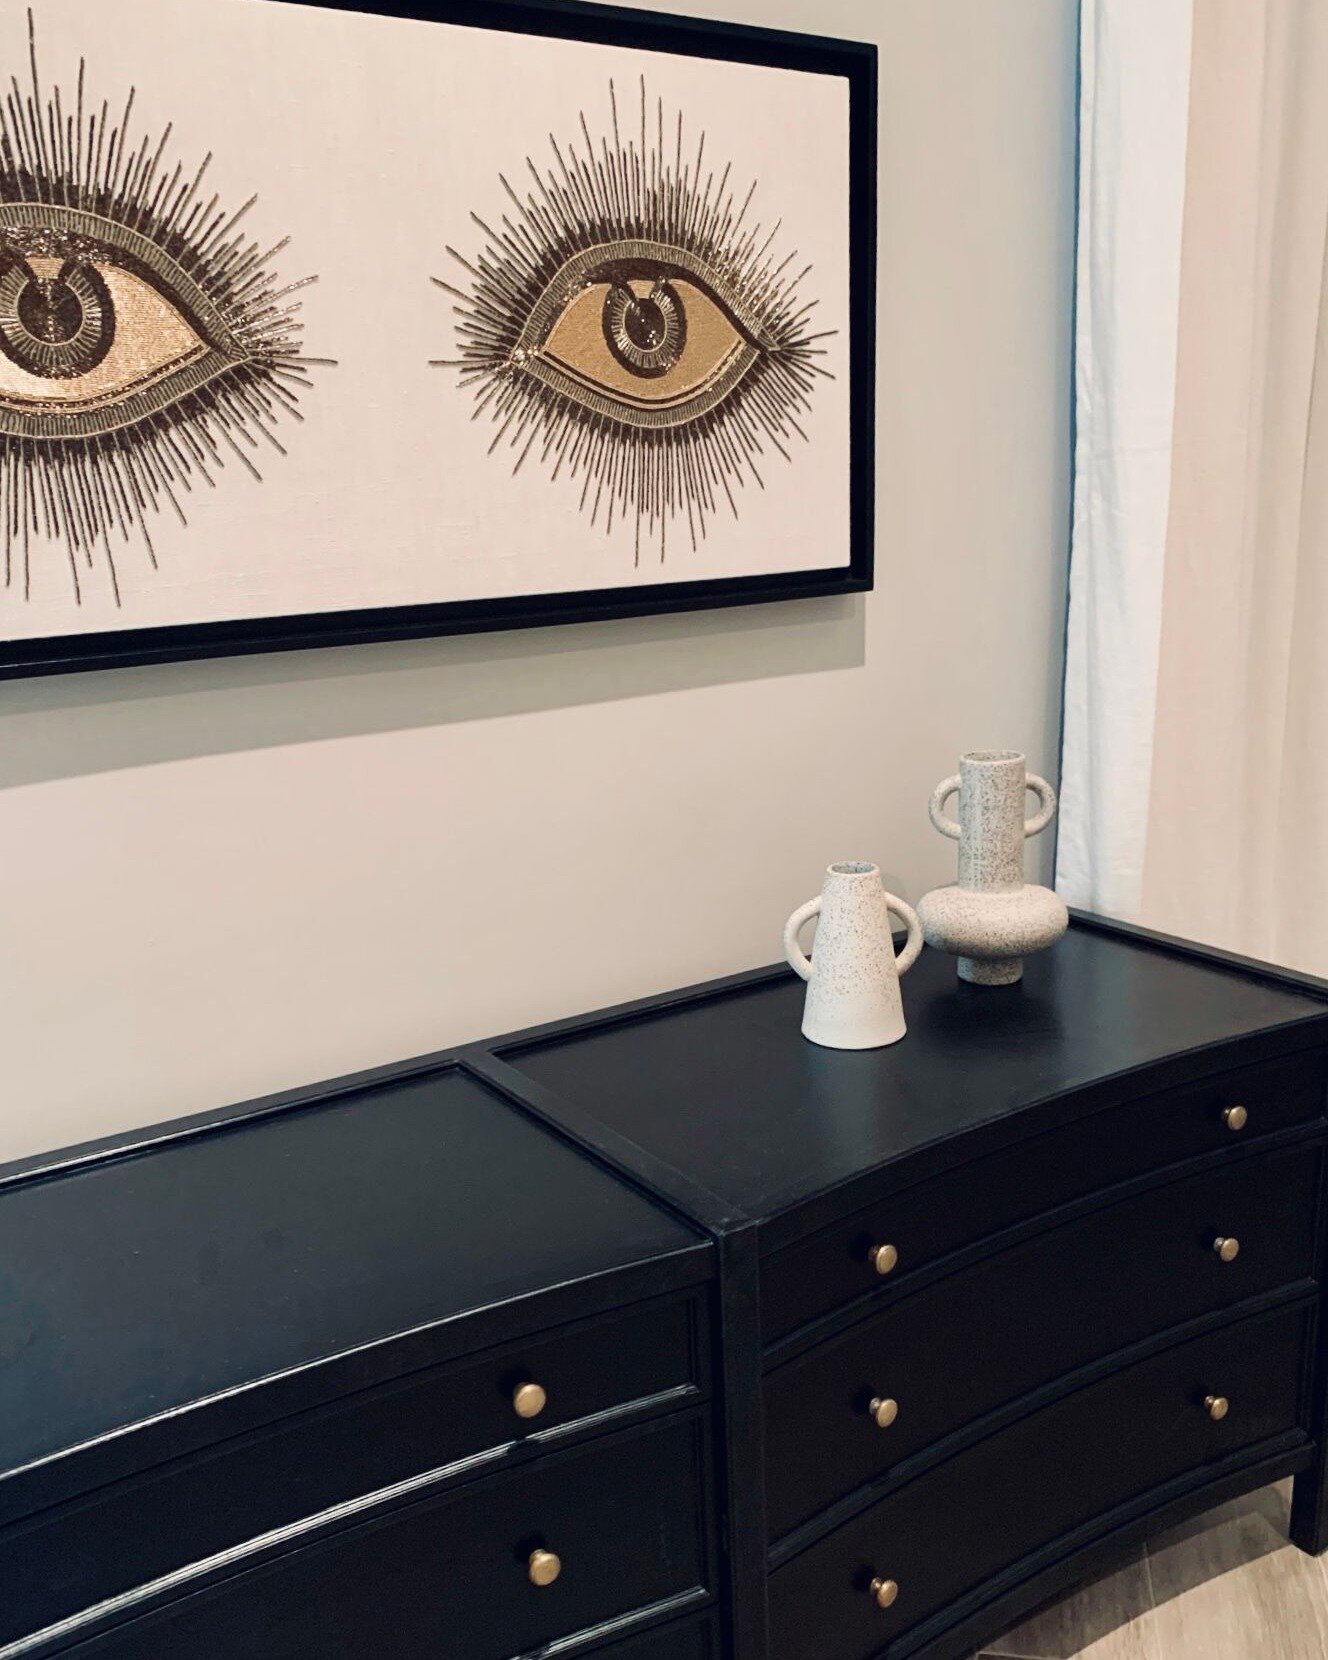 The eyes have it! We love this Jonathan Adler beaded artwork. It was the perfect fit for this guest bedroom.

#austininteriordesign #austininteriordesigner 
#austindesign #atxhome #austinhome #austindesigner #interiordesignaustin #texashomes #texasin